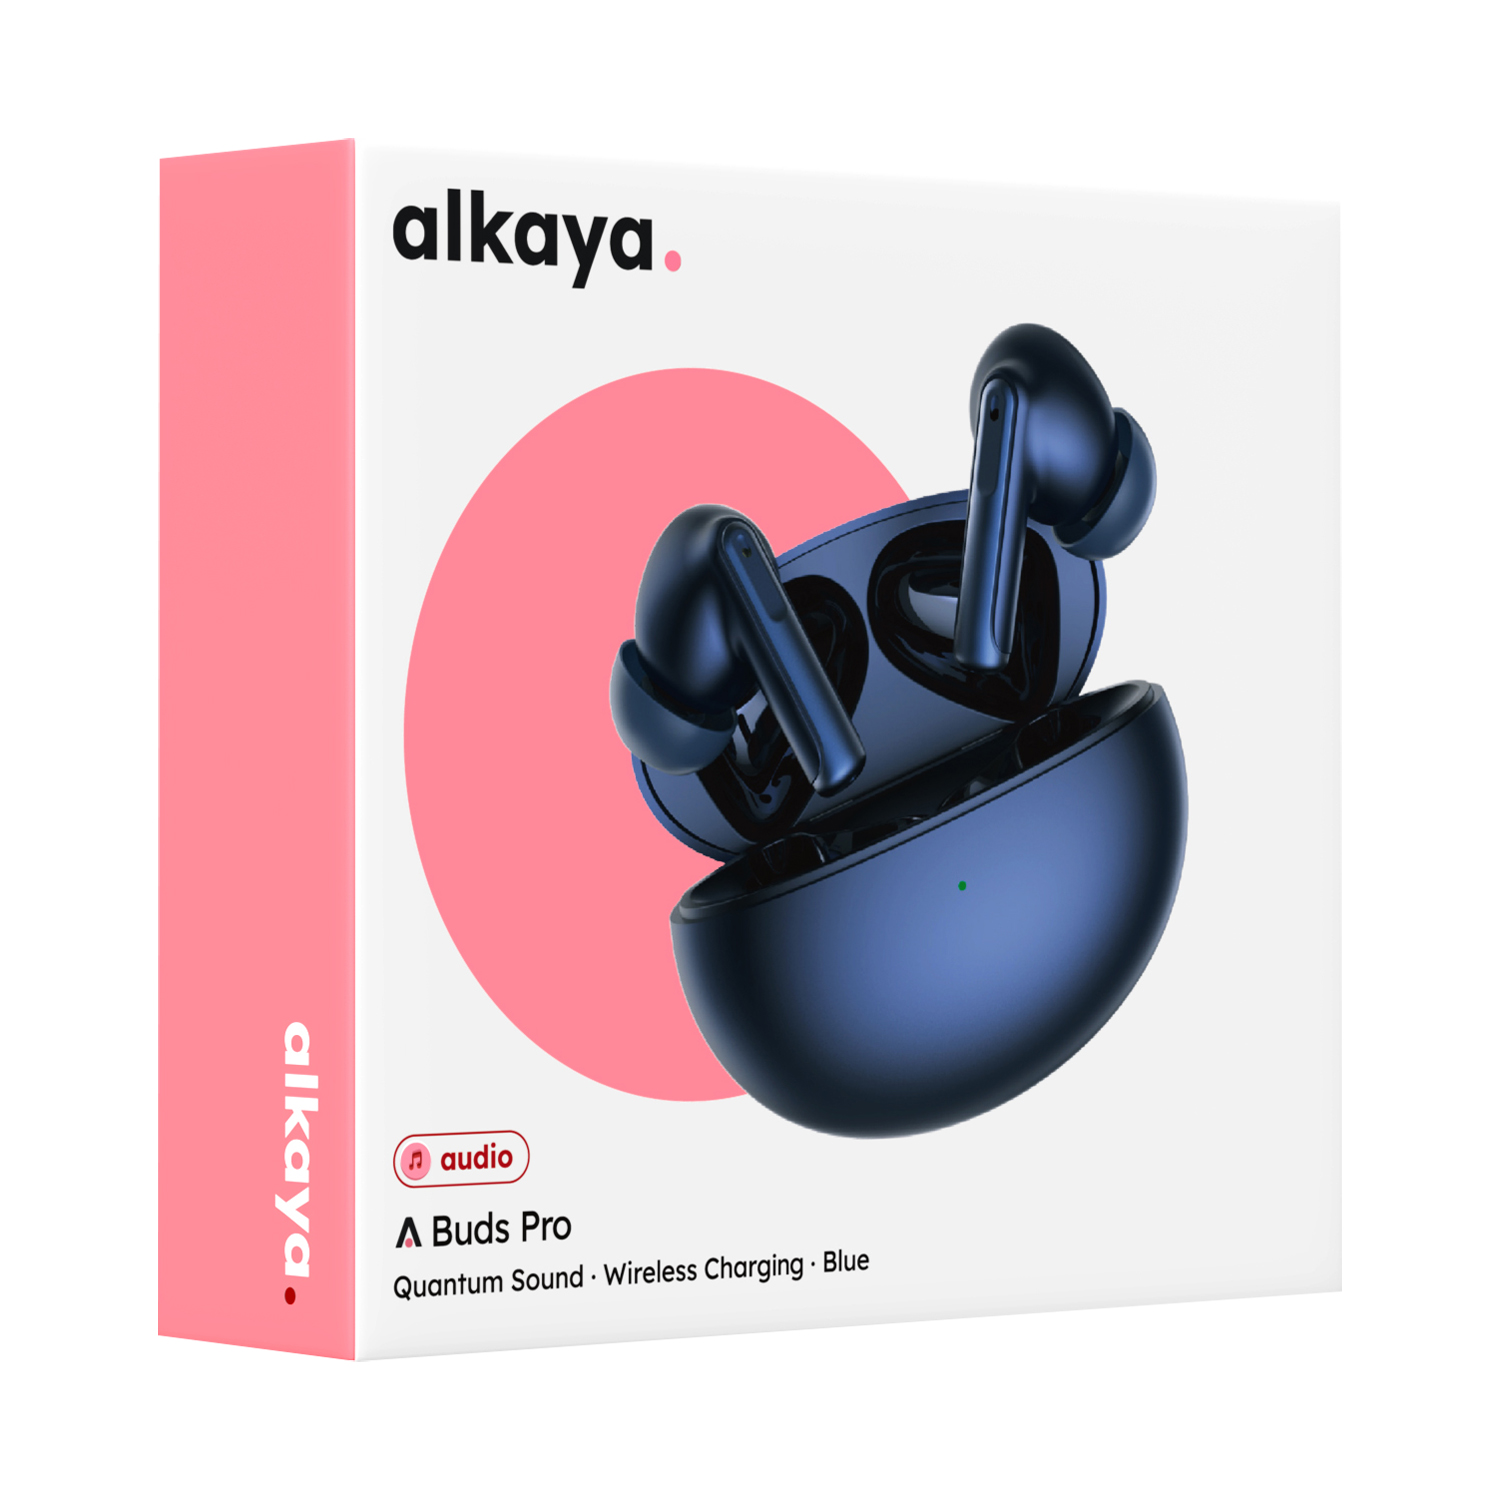 alkaya. | A Buds Pro Quantum Sound Bluetooth Headphones with Inductive Charging, Blue